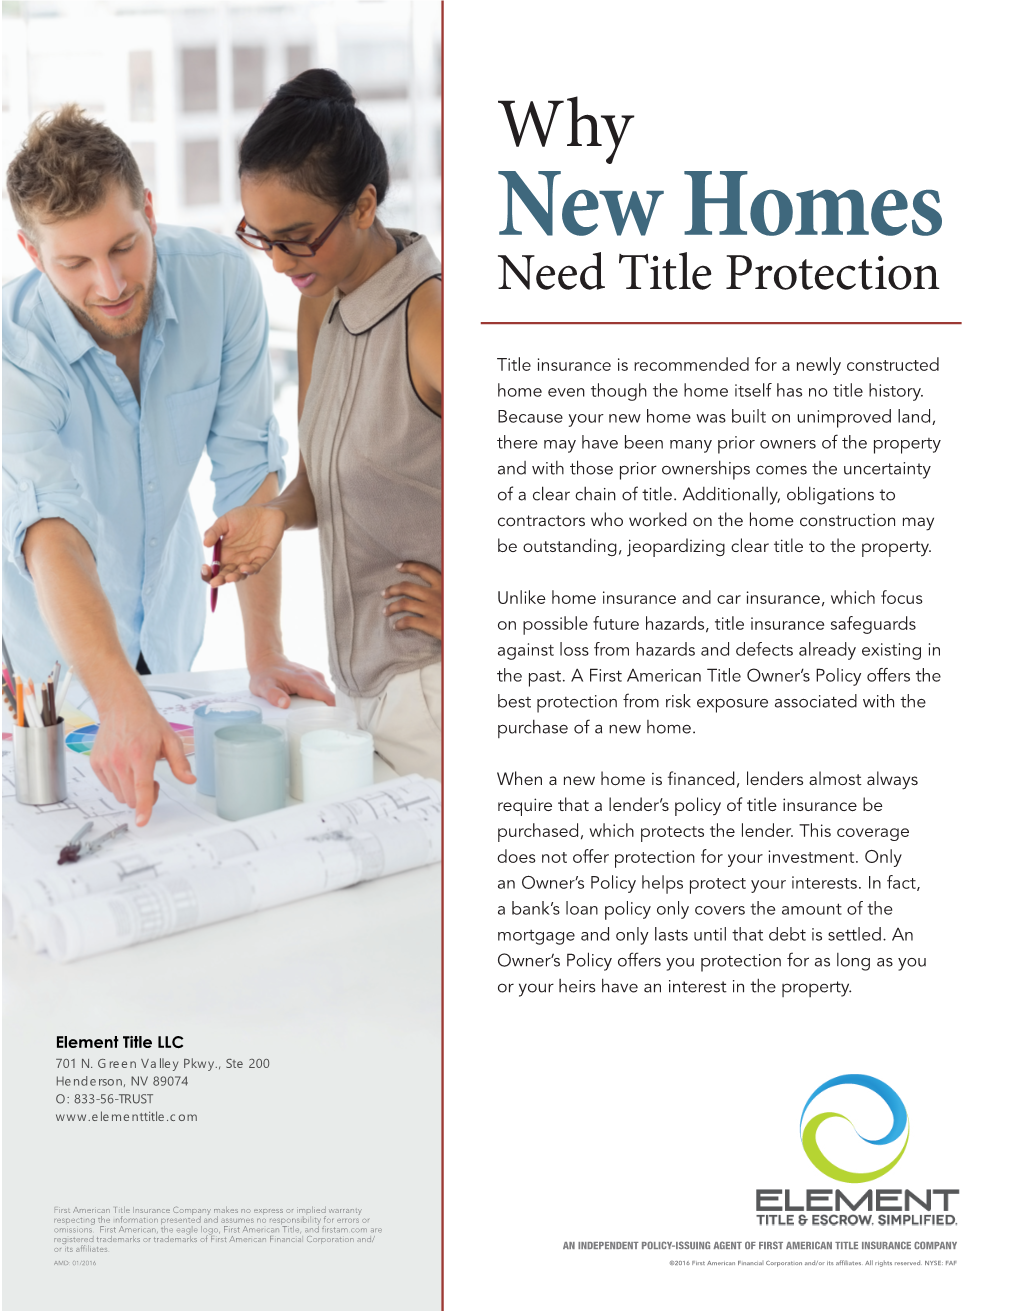 Why New Homes Need Title Insurance